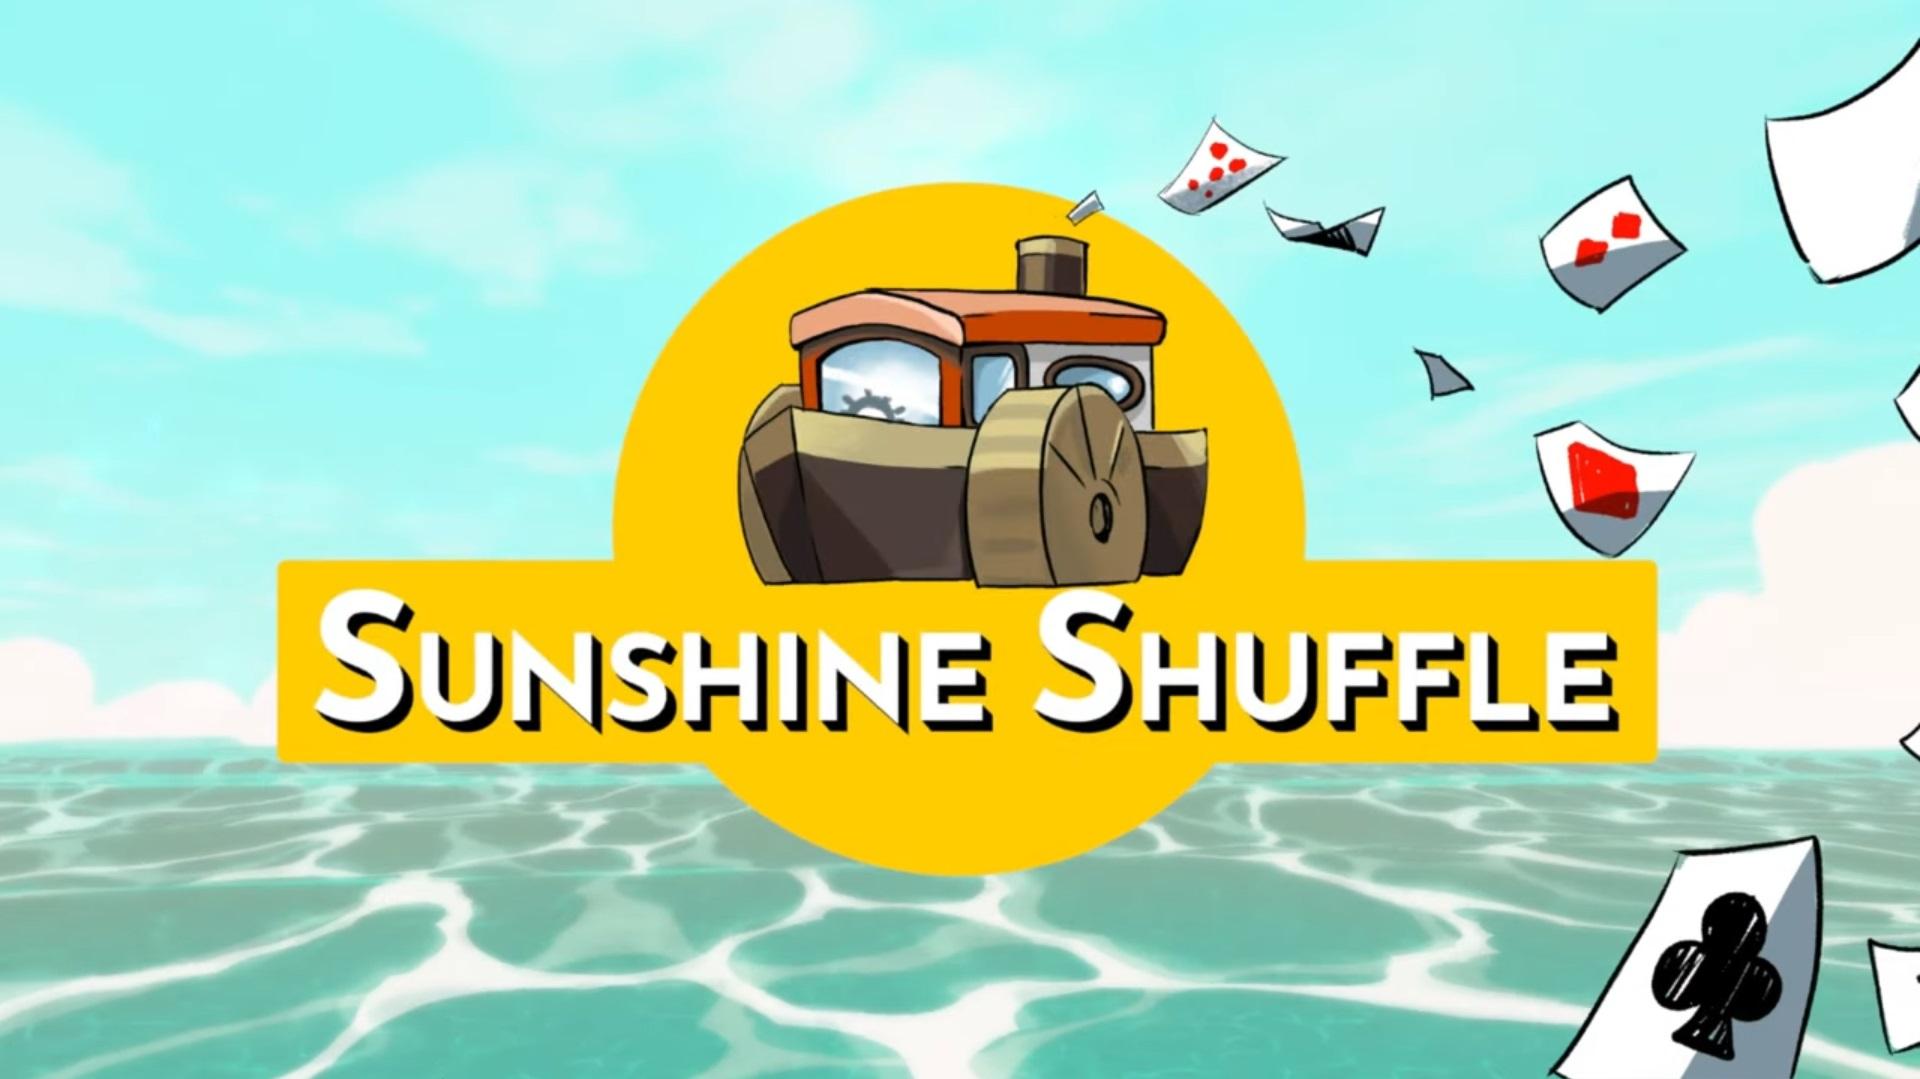 Sunshine Shuffle is an indie poker game out now but not on Switch